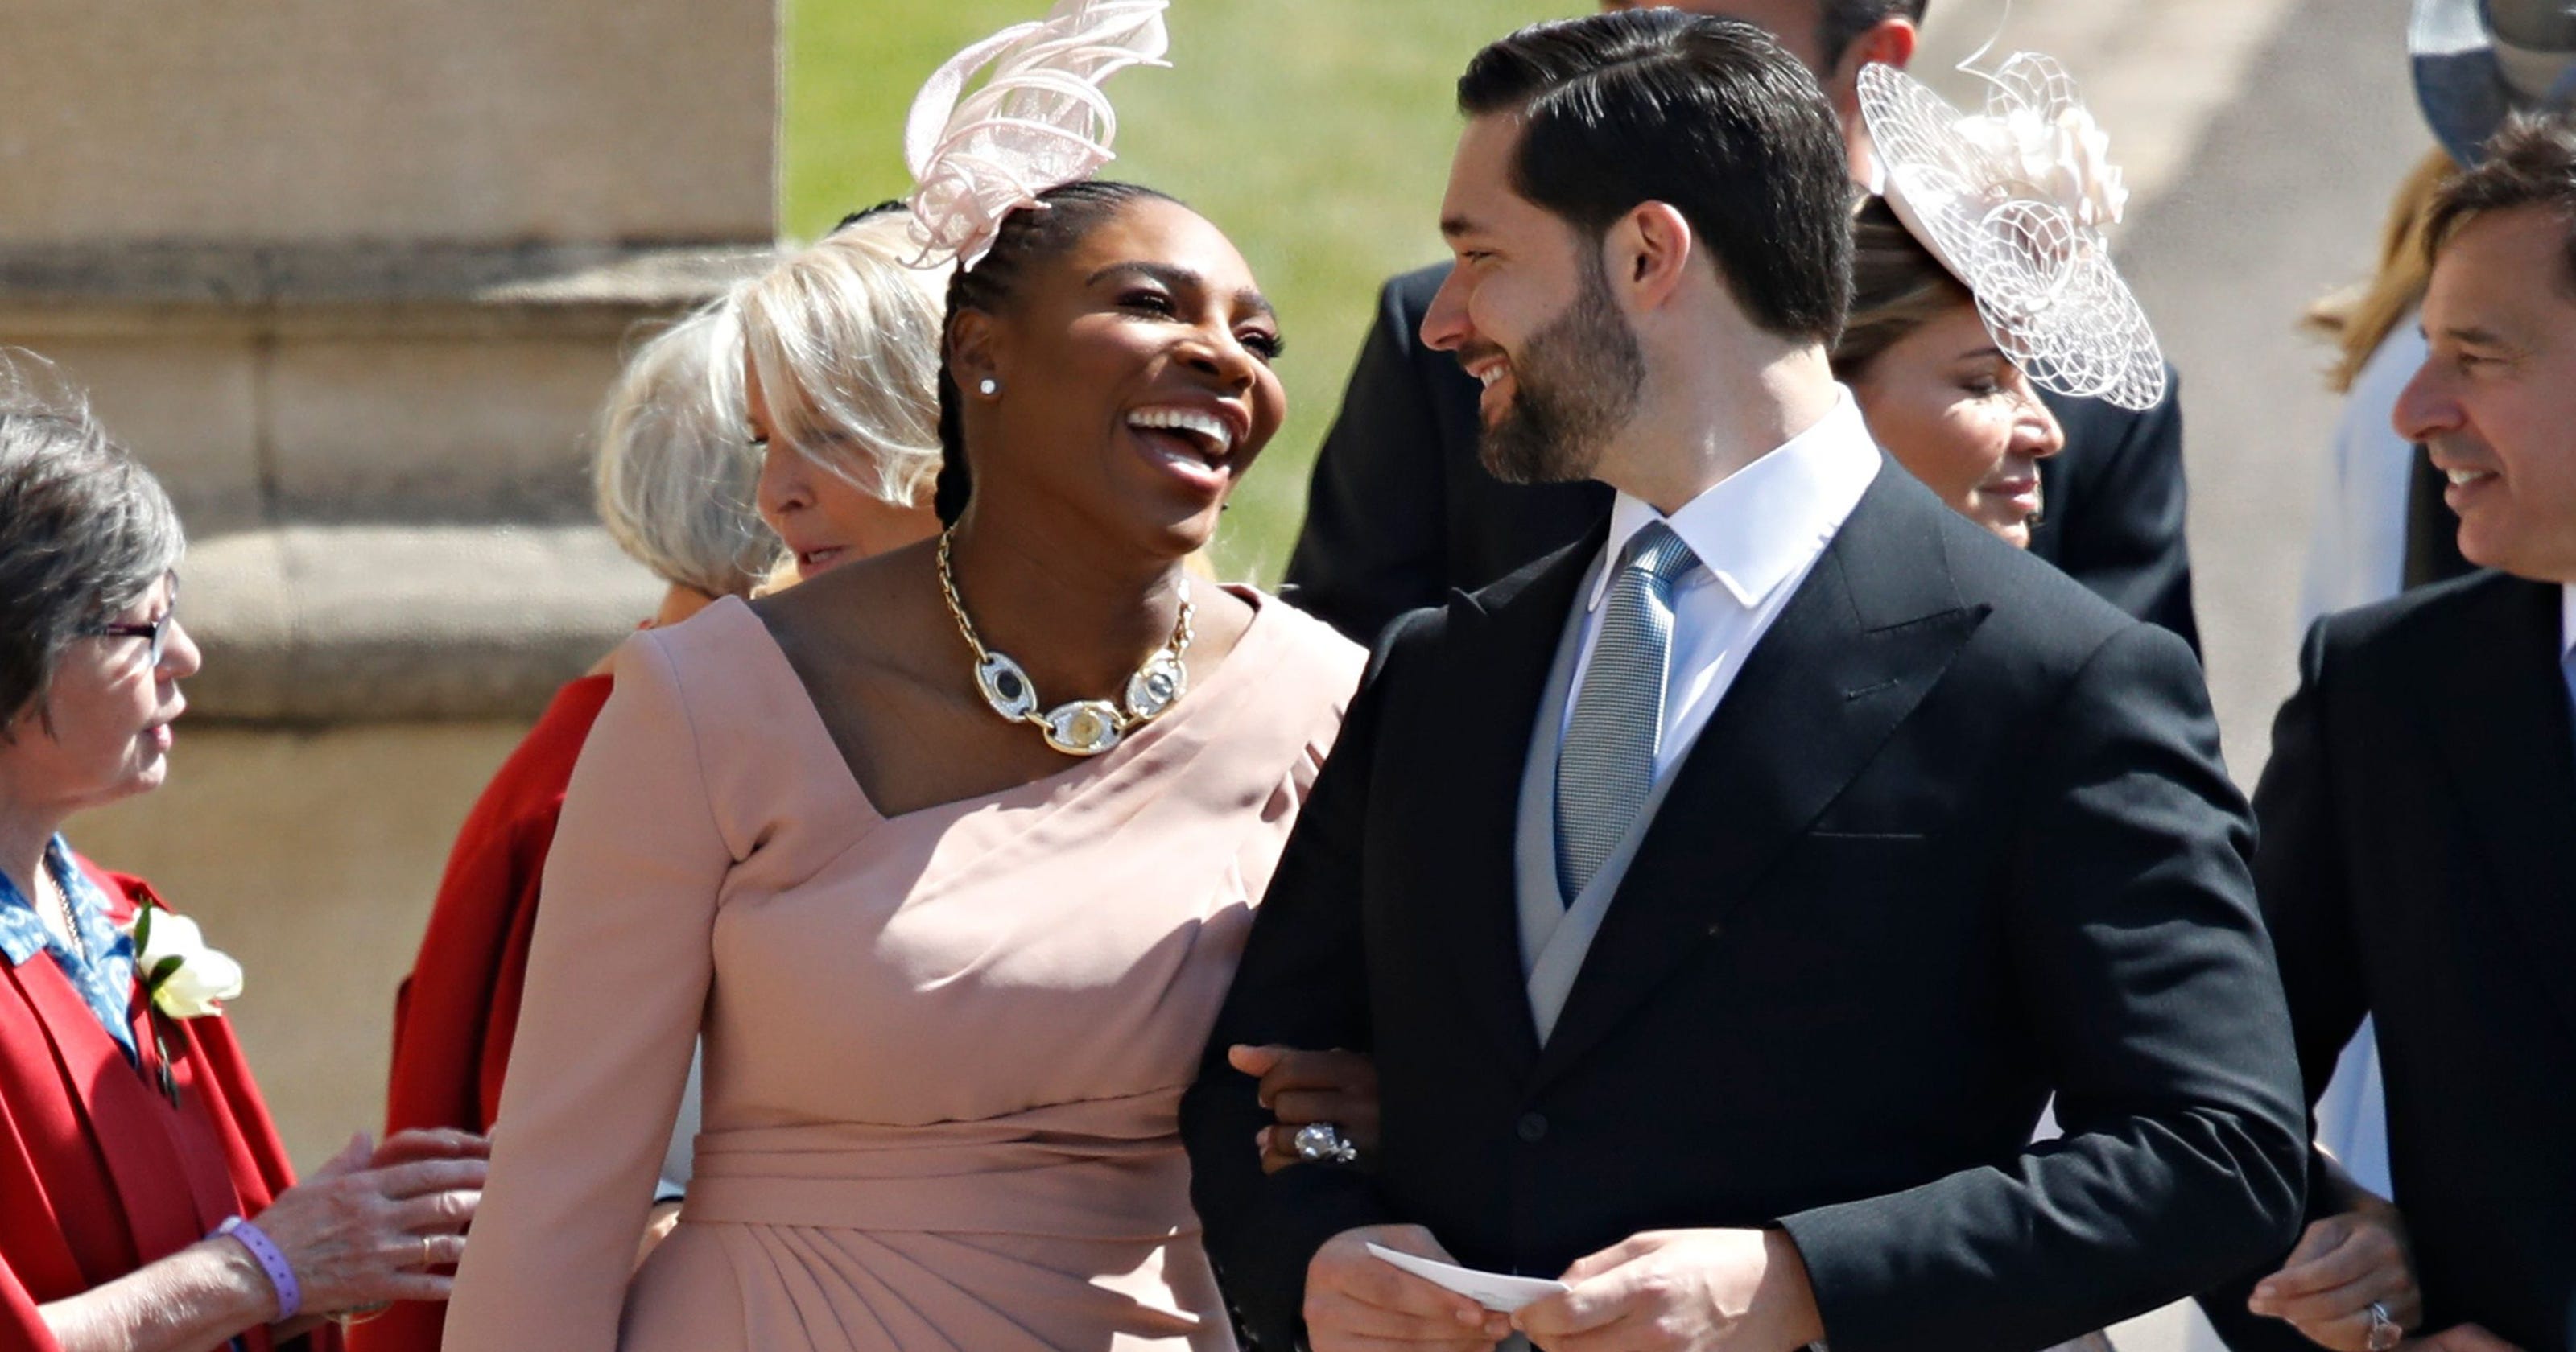 Alexis Ohanian posts emotional video of Serena Wiliams' comeback3200 x 1680